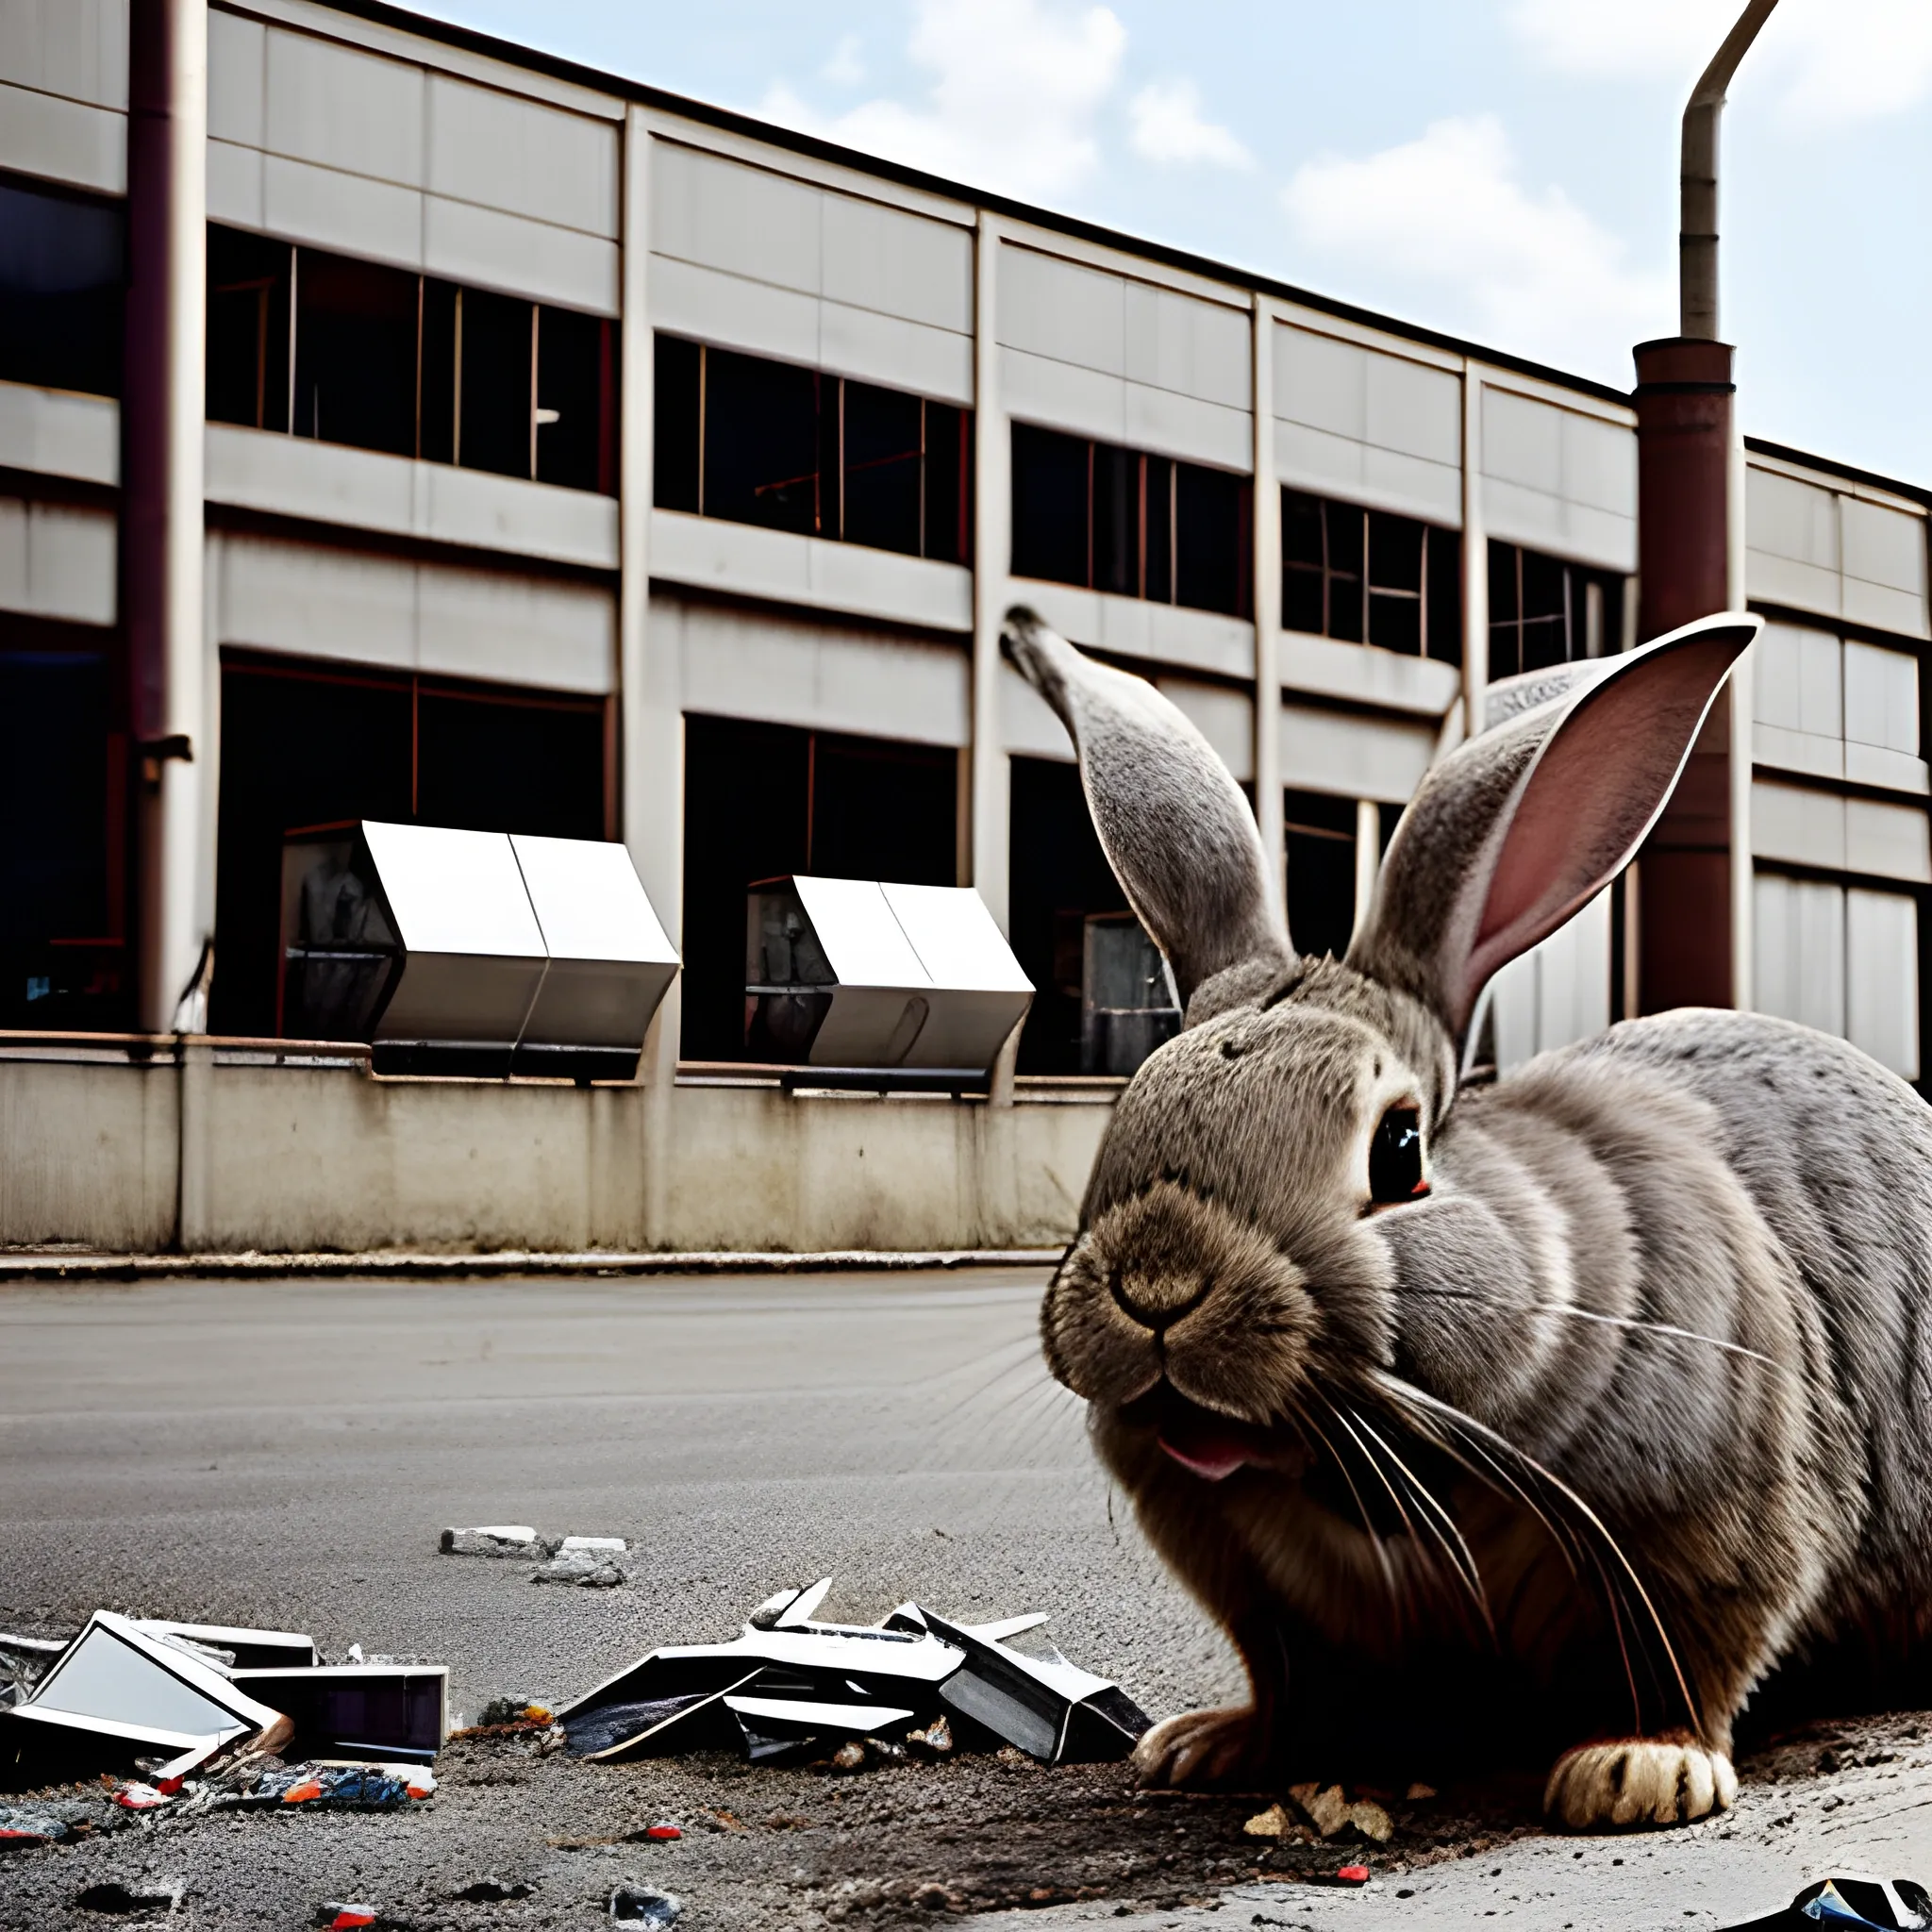 a large rabbit devours pieces of metal in front of a factory, photograph